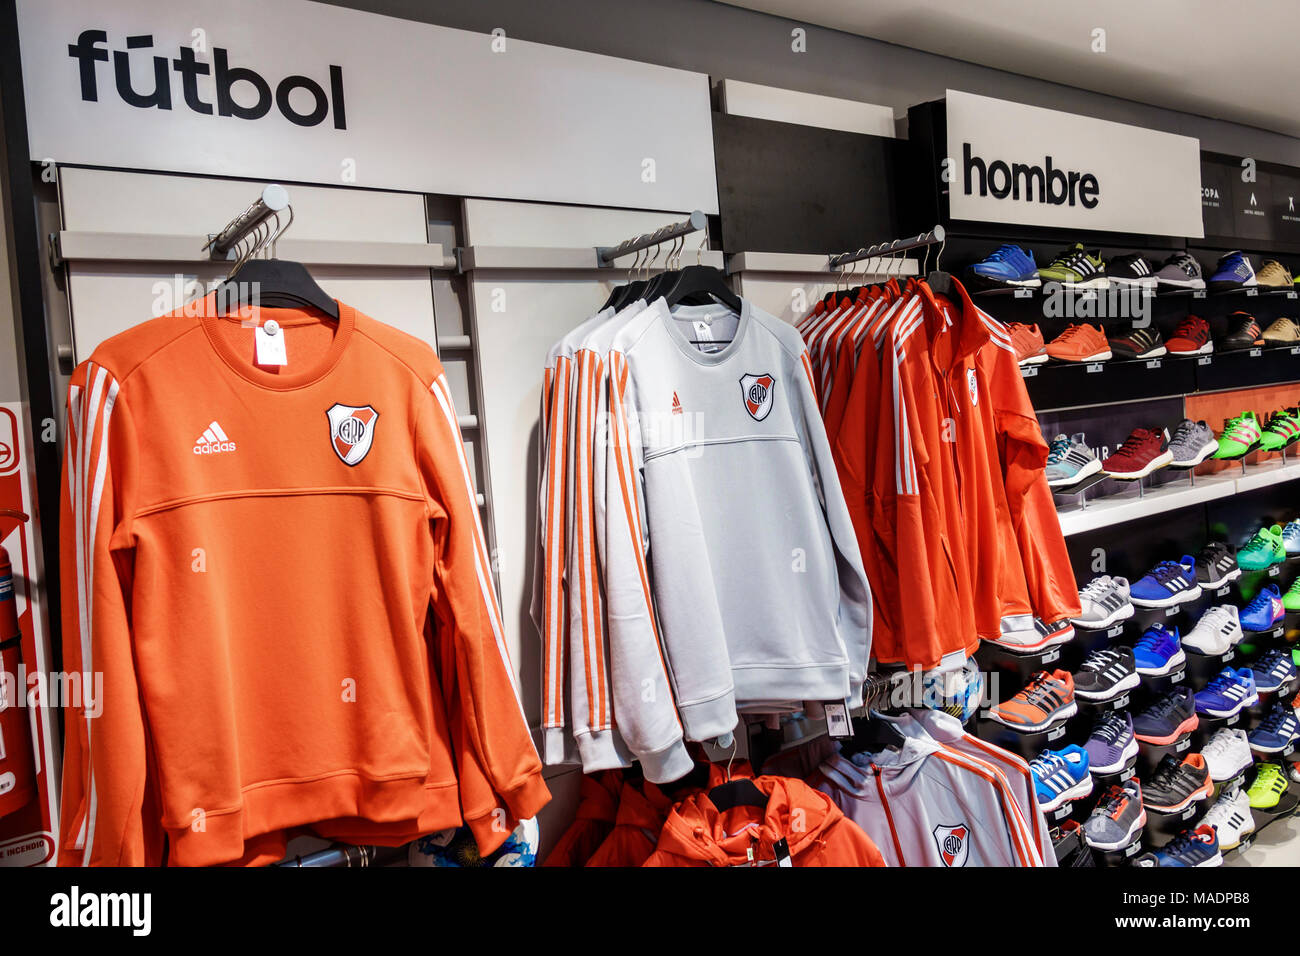 hacha Amante rifle Buenos Aires Argentina,Recoleta mall,Adidas,brand store,athletic  sportswear,sneakers,football jersey,men's,Spanish language sign,visitors  travel trave Stock Photo - Alamy